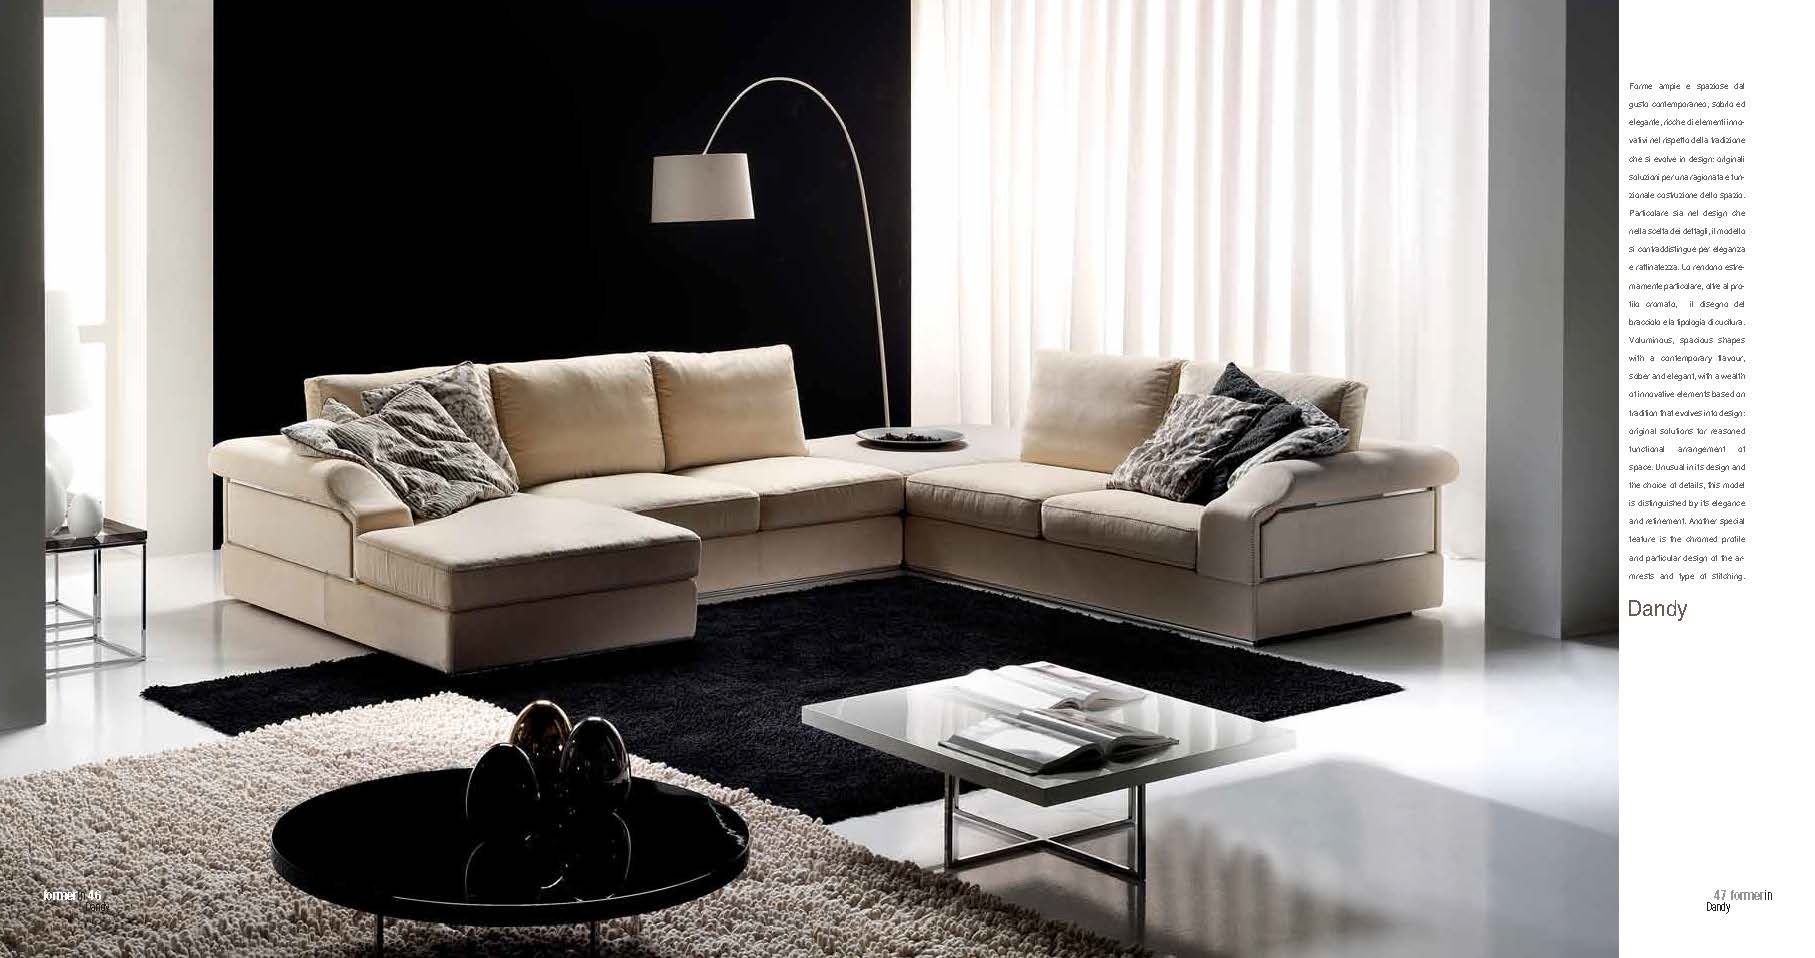 Brands Formerin Classic Living Room, Italy Dandy